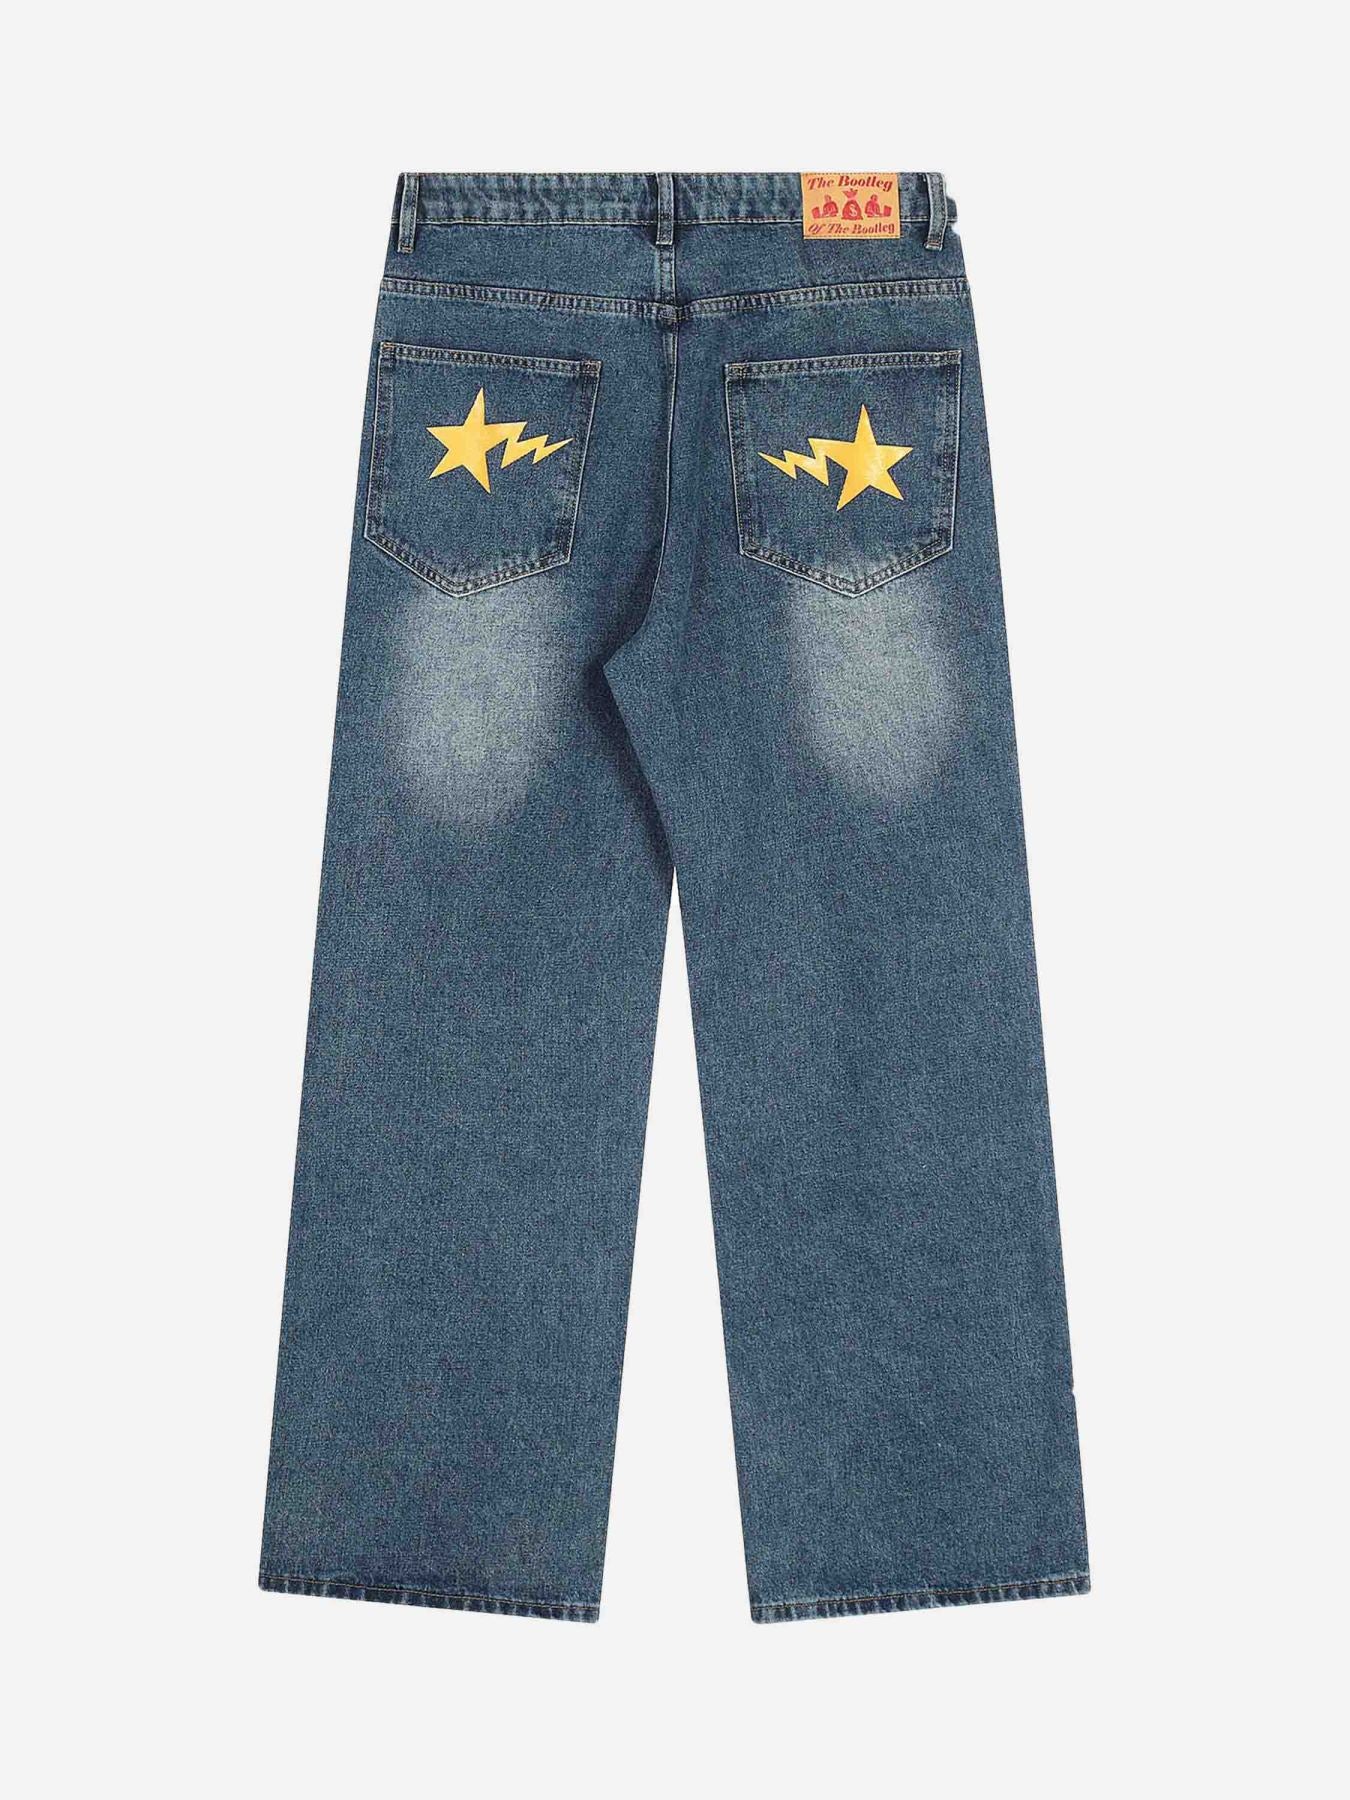 The Supermade Personality Smiley Face Printed Jeans